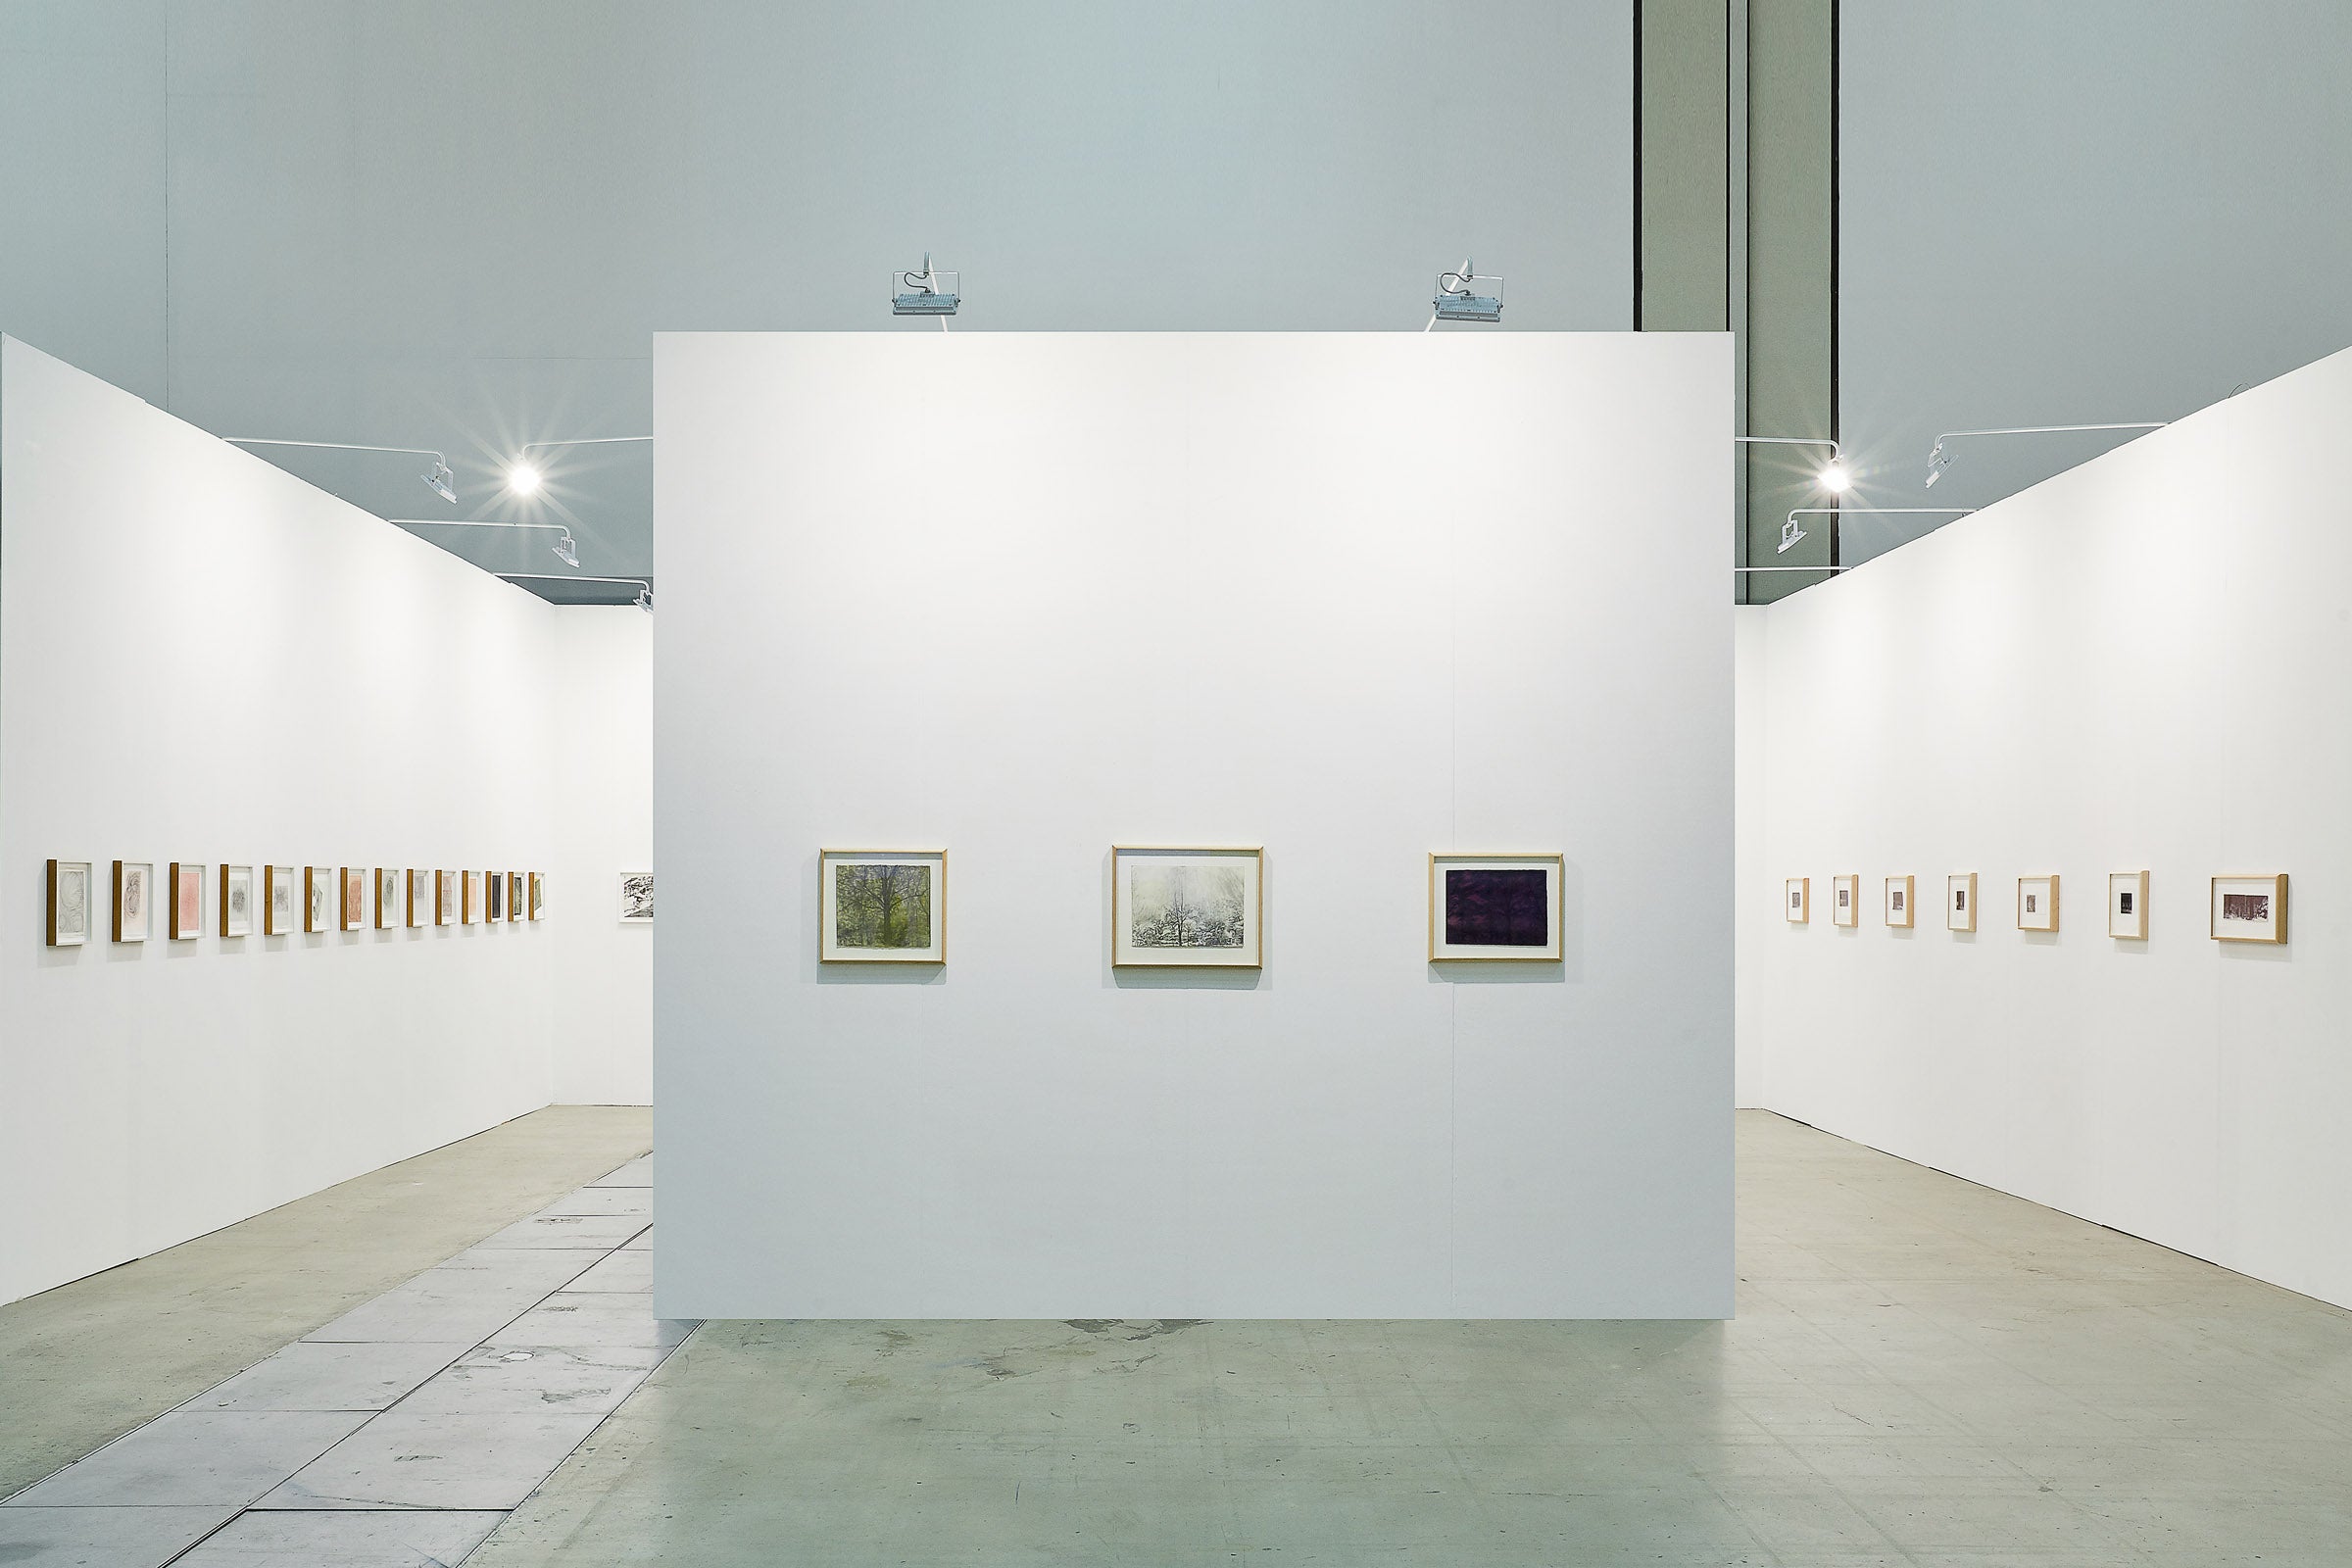 Installation of Drawings by Marie Cloquet, Linn Meyers, and Charles Ritchie at Art Busan 2020, Busan, South Korea image